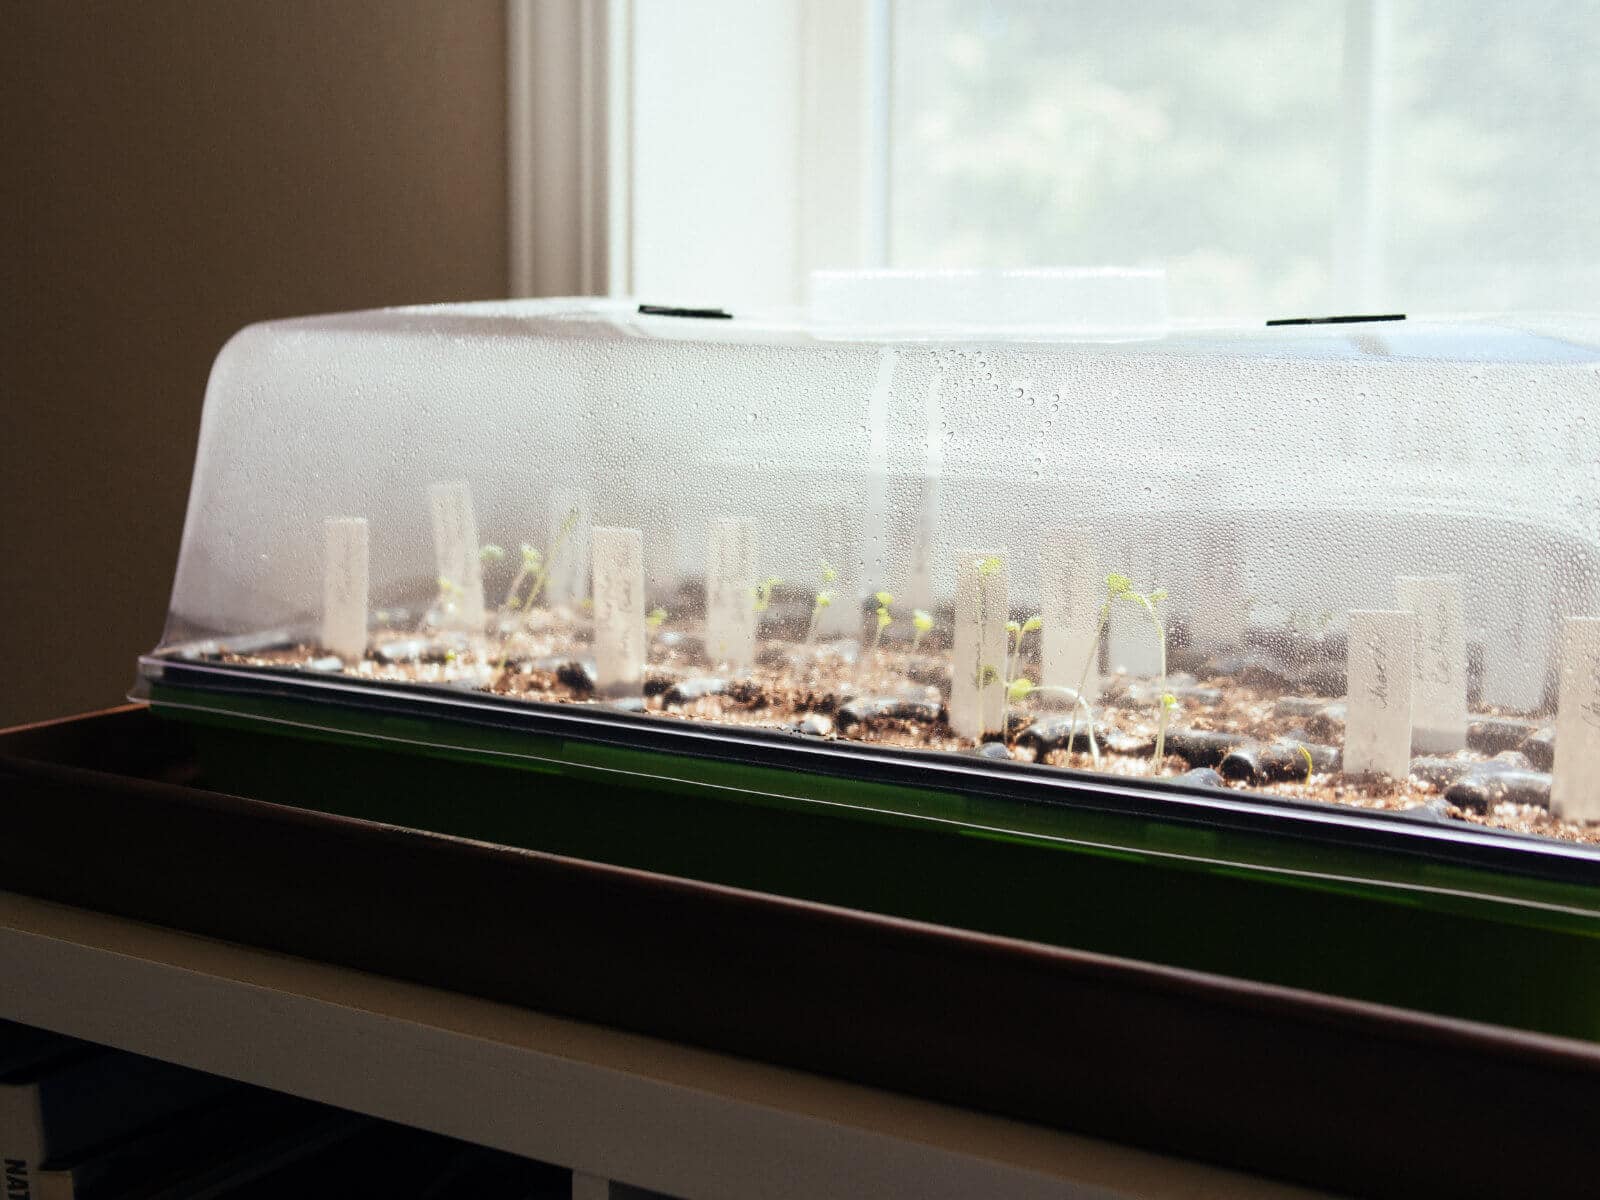 Seedlings gaining warmth from their mini greenhouse by the window